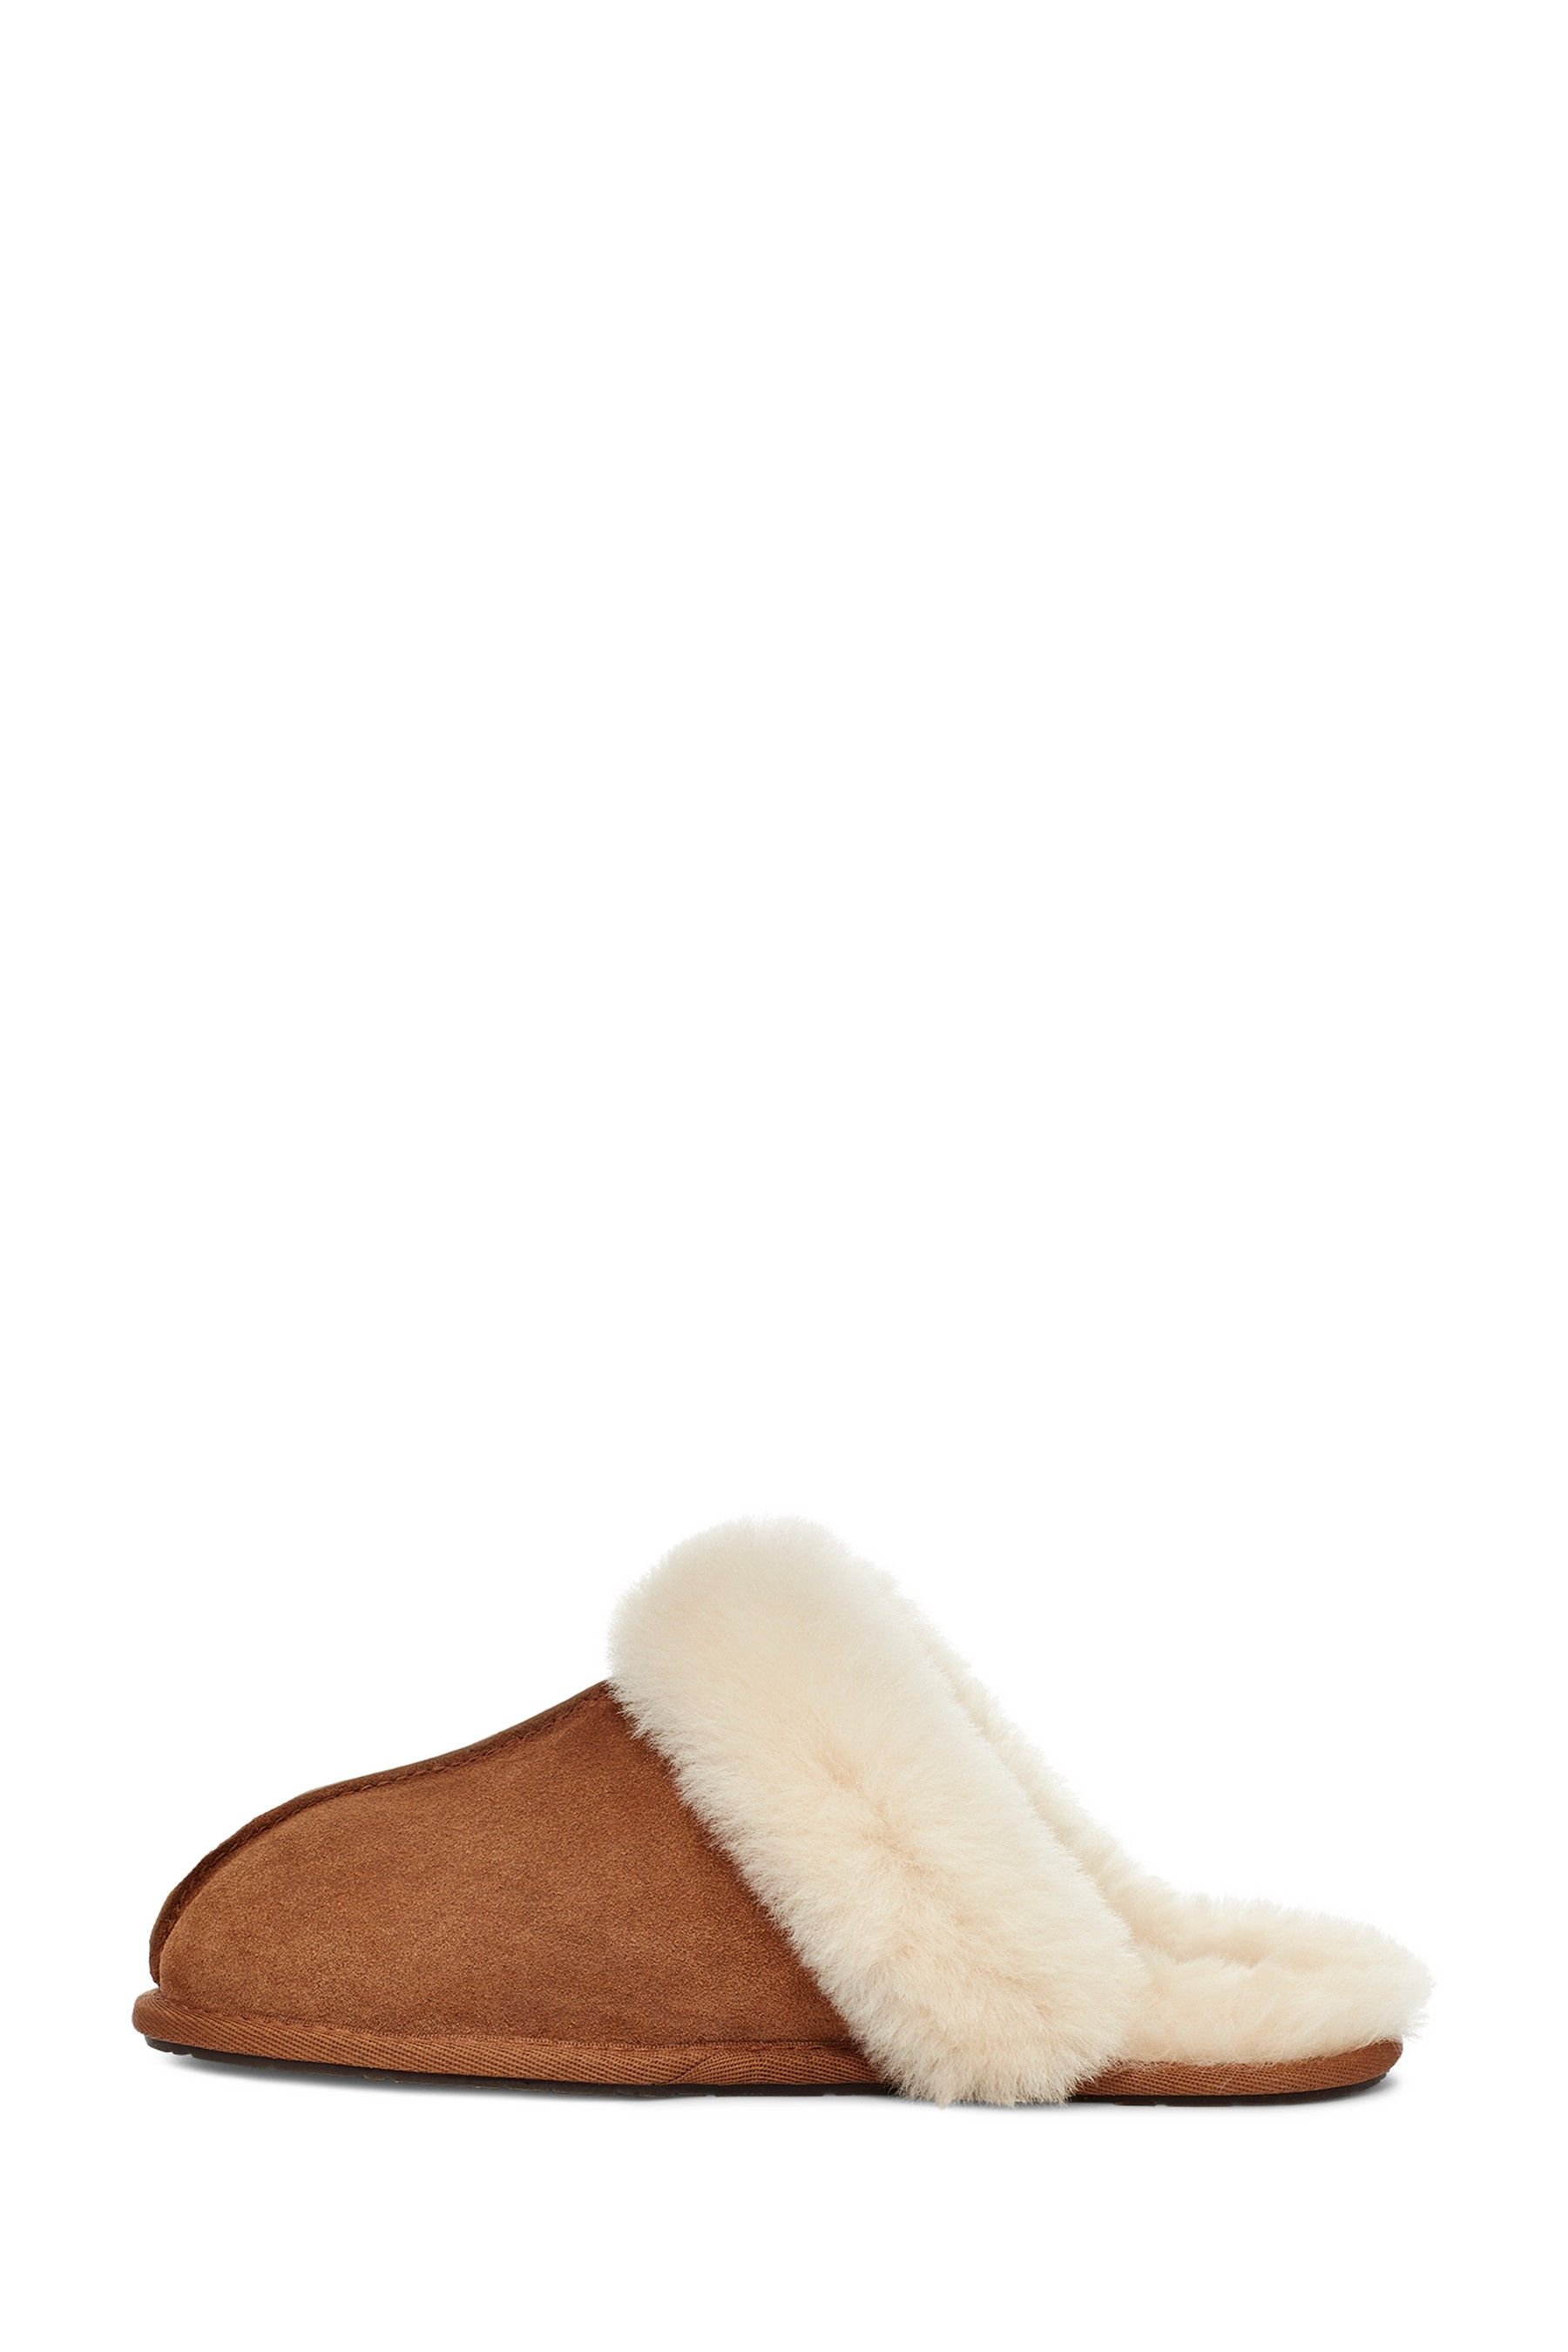 Buy UGG Scuffette II Slippers from the Next UK online shop